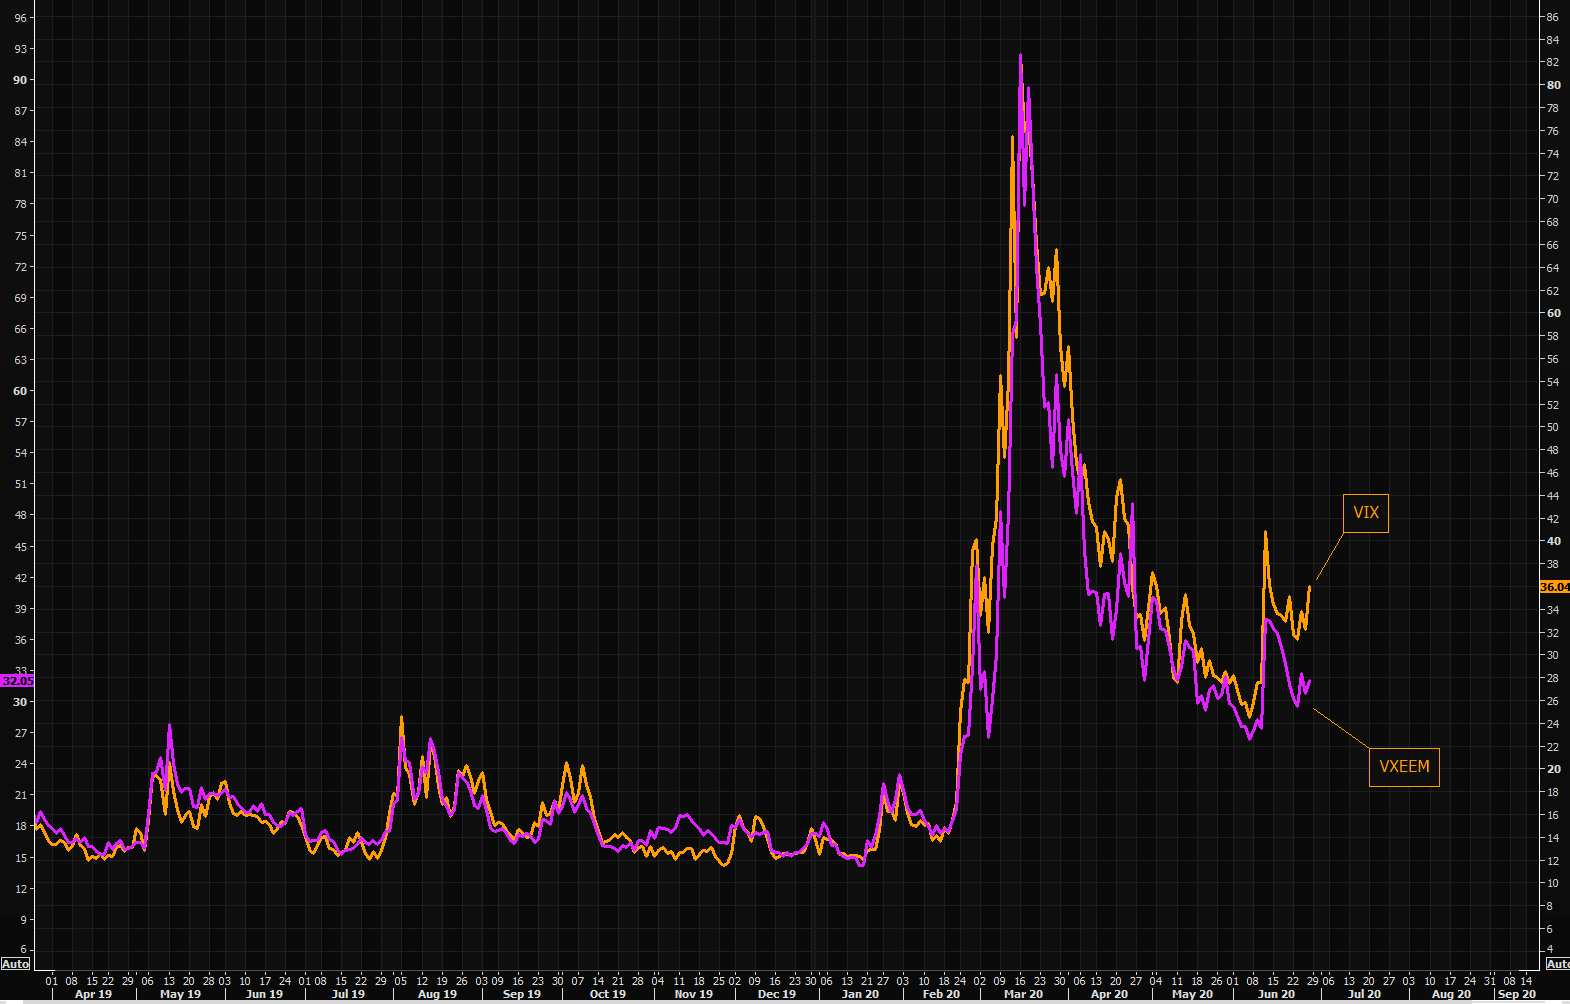 Panic redux - you know people are fearful when "they" take VIX over VXEEM by this much